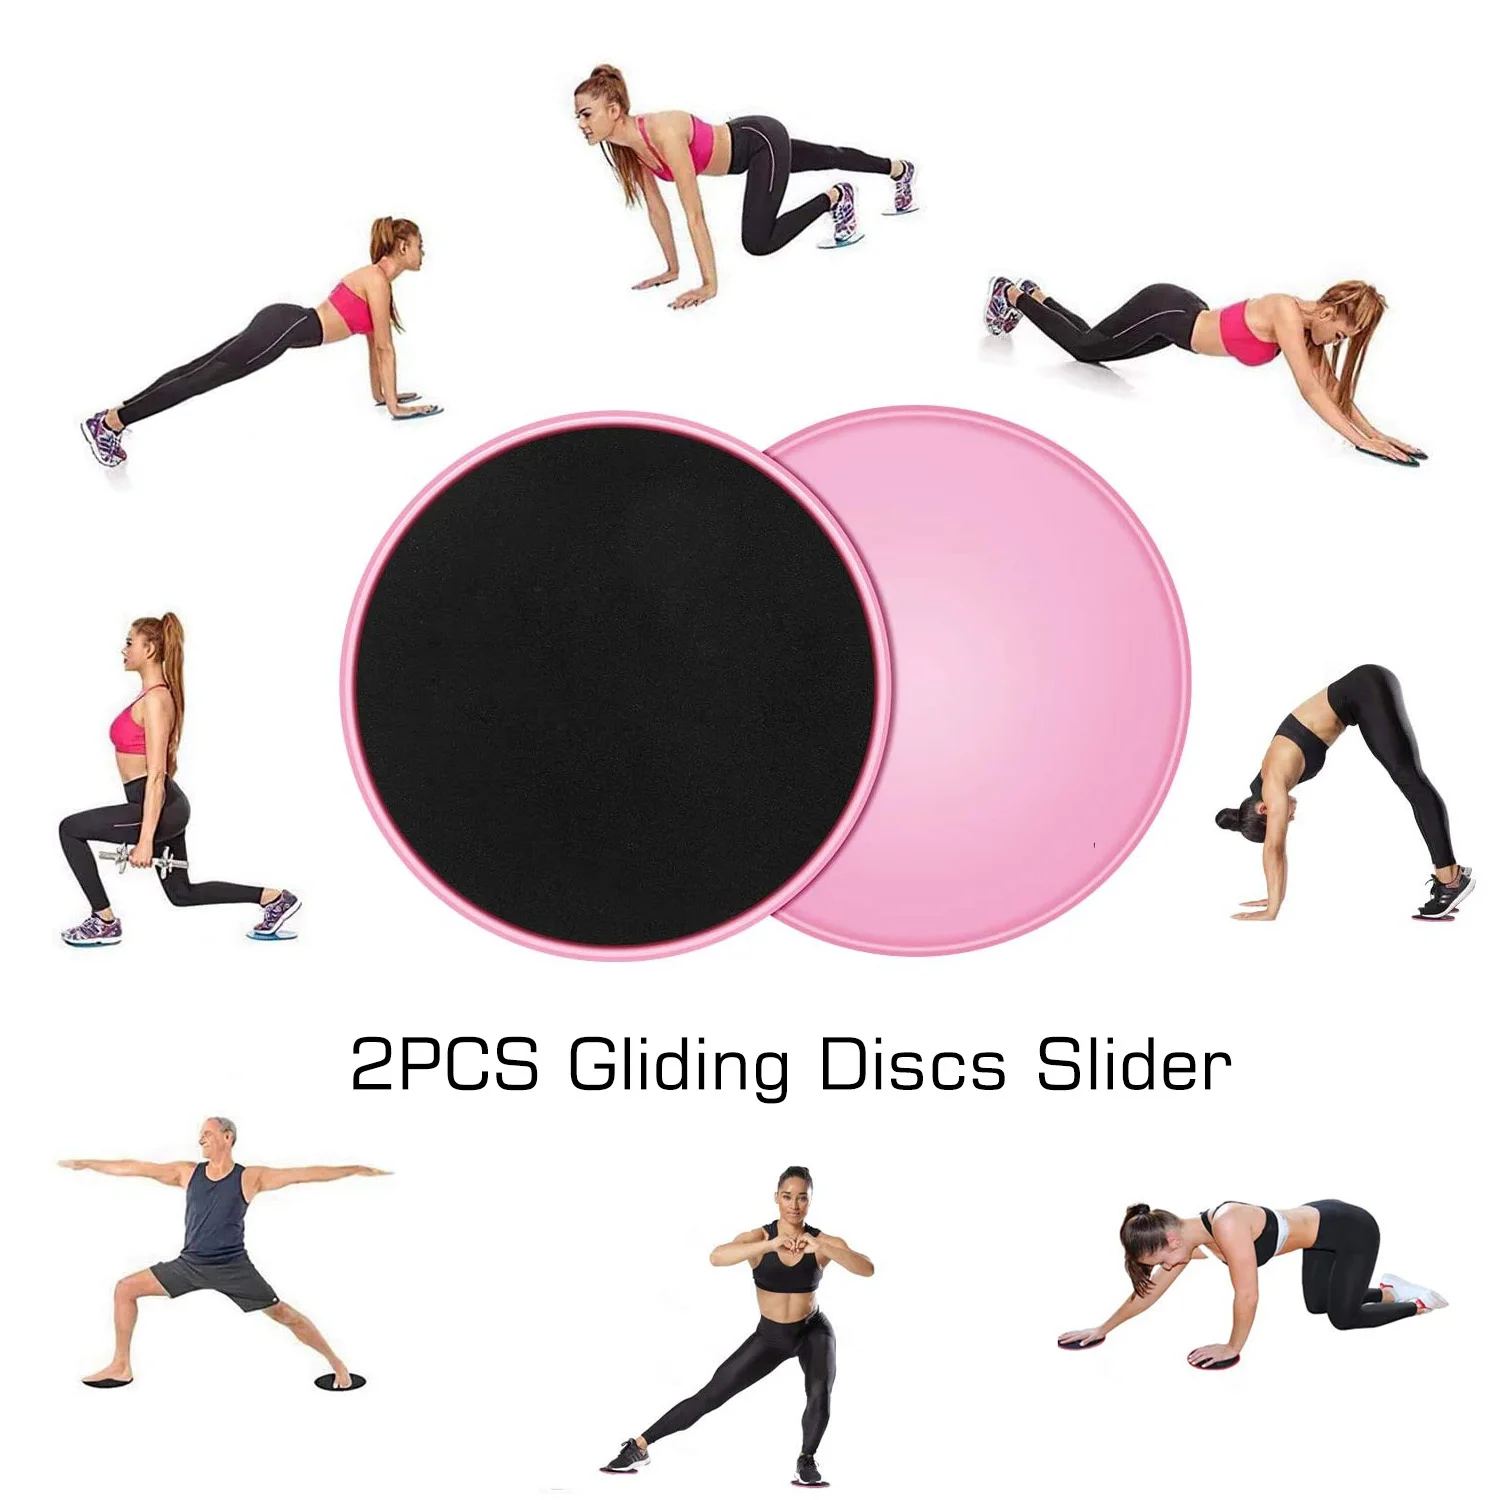 

2pcs Gliding Discs Slider Fitness Disc Exercise Sliding Plate Core Muscle Abdominal Training Yoga Workout Equipment